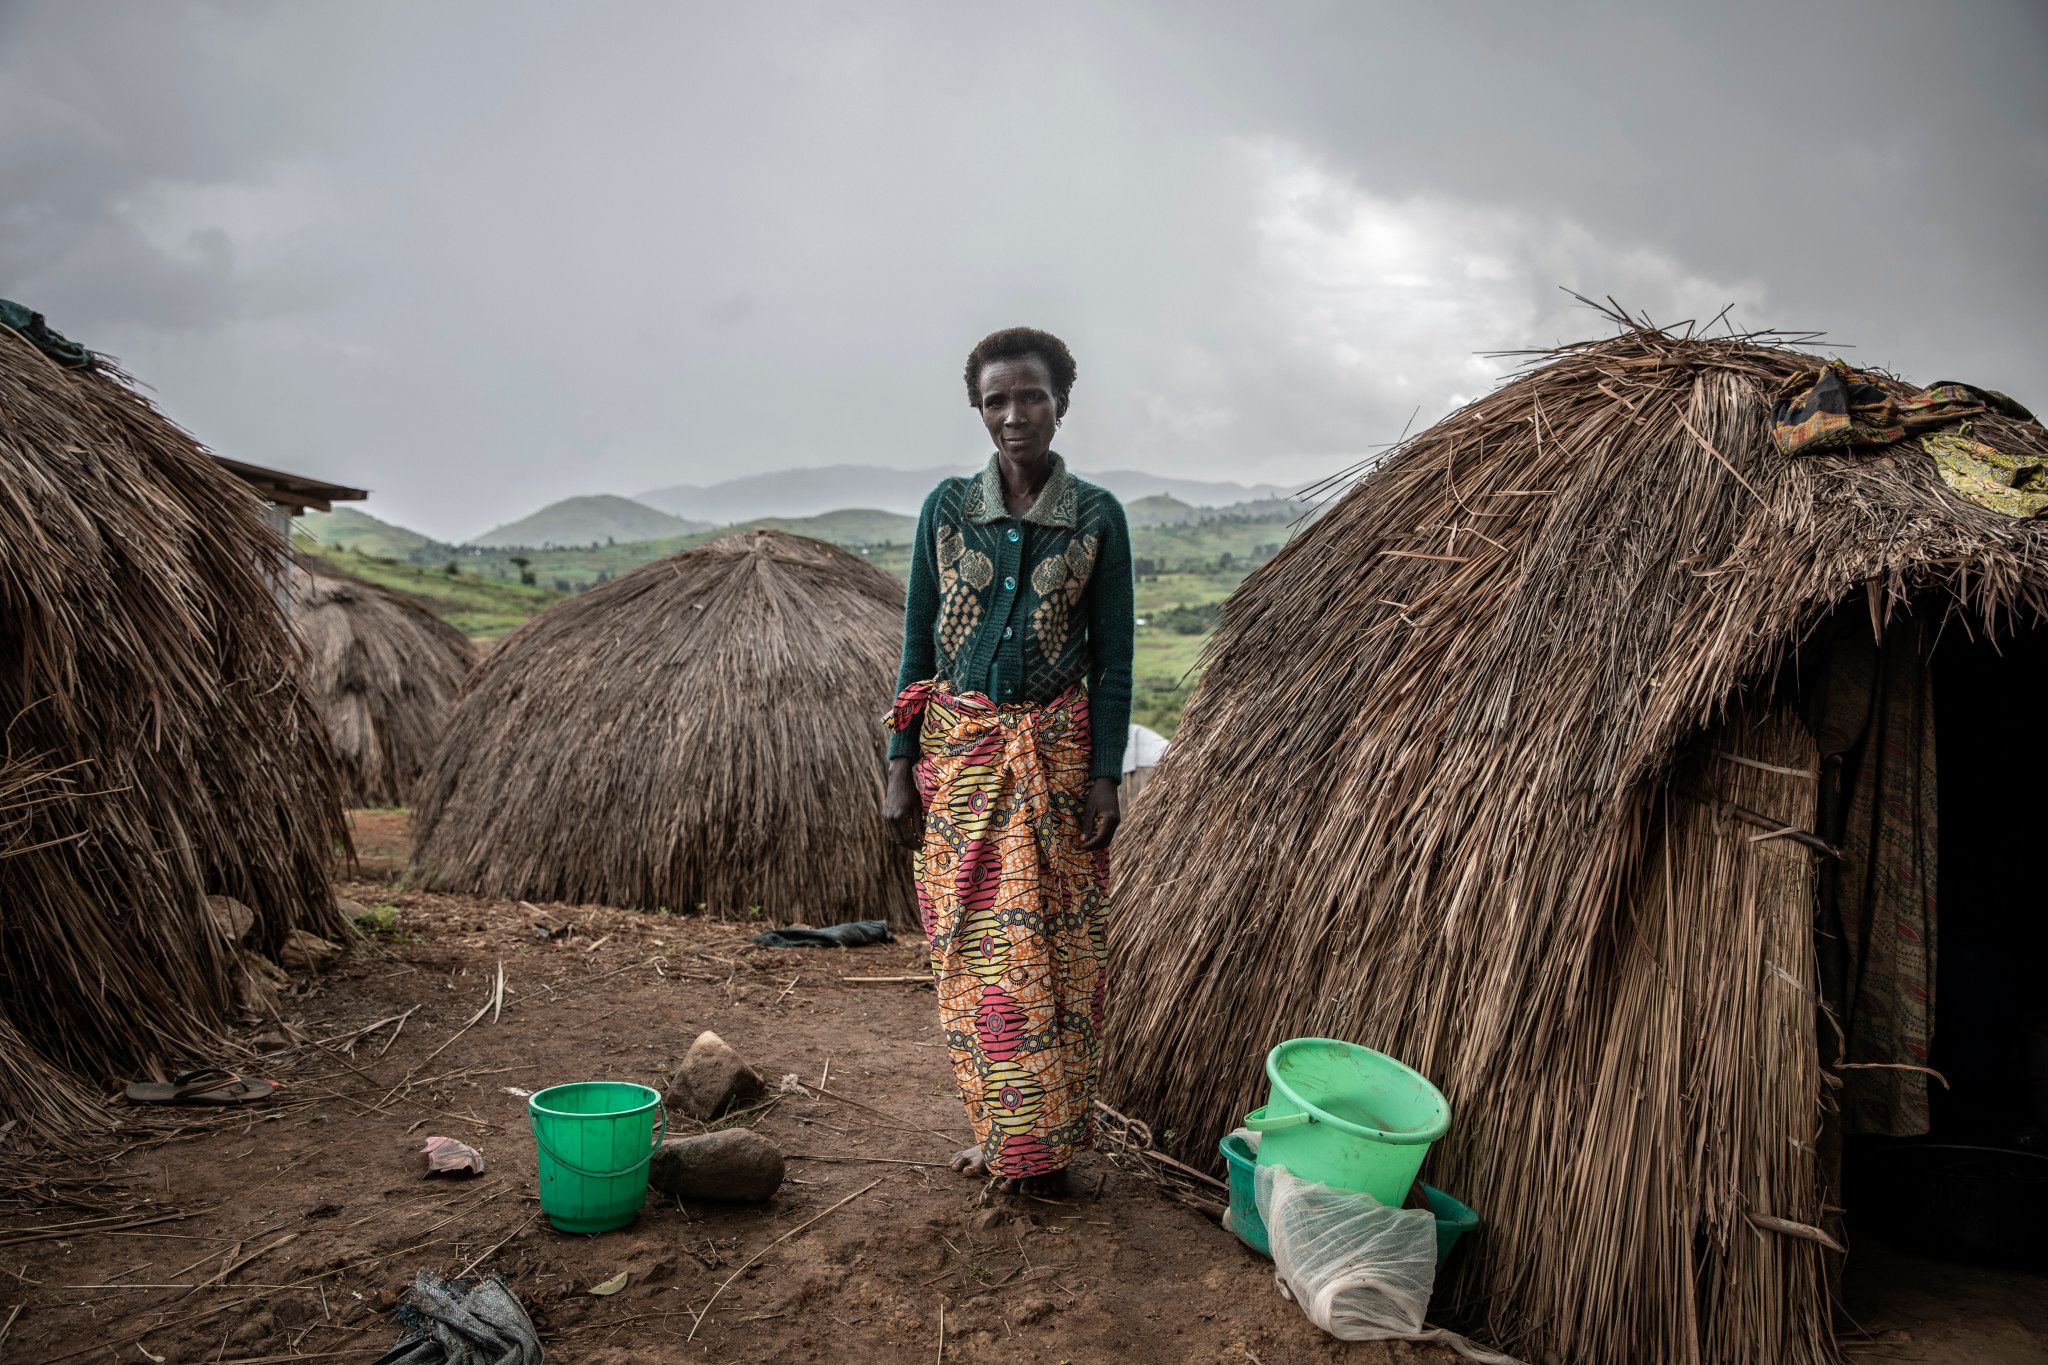 Kambe Site, Ituri Province, May 2021. Jeanne Borive, 45, who has eight children and who was separated from her husband when she fled her village of Lithe two and a half years ago, stands in a camp for people from the Hema community displaced by attacks by Lendu militias in Djugu territory. She spent four hours collecting wood to cook and to sell at the local market. "If there's peace I'll go back home. If not, I'll stay here," she said.